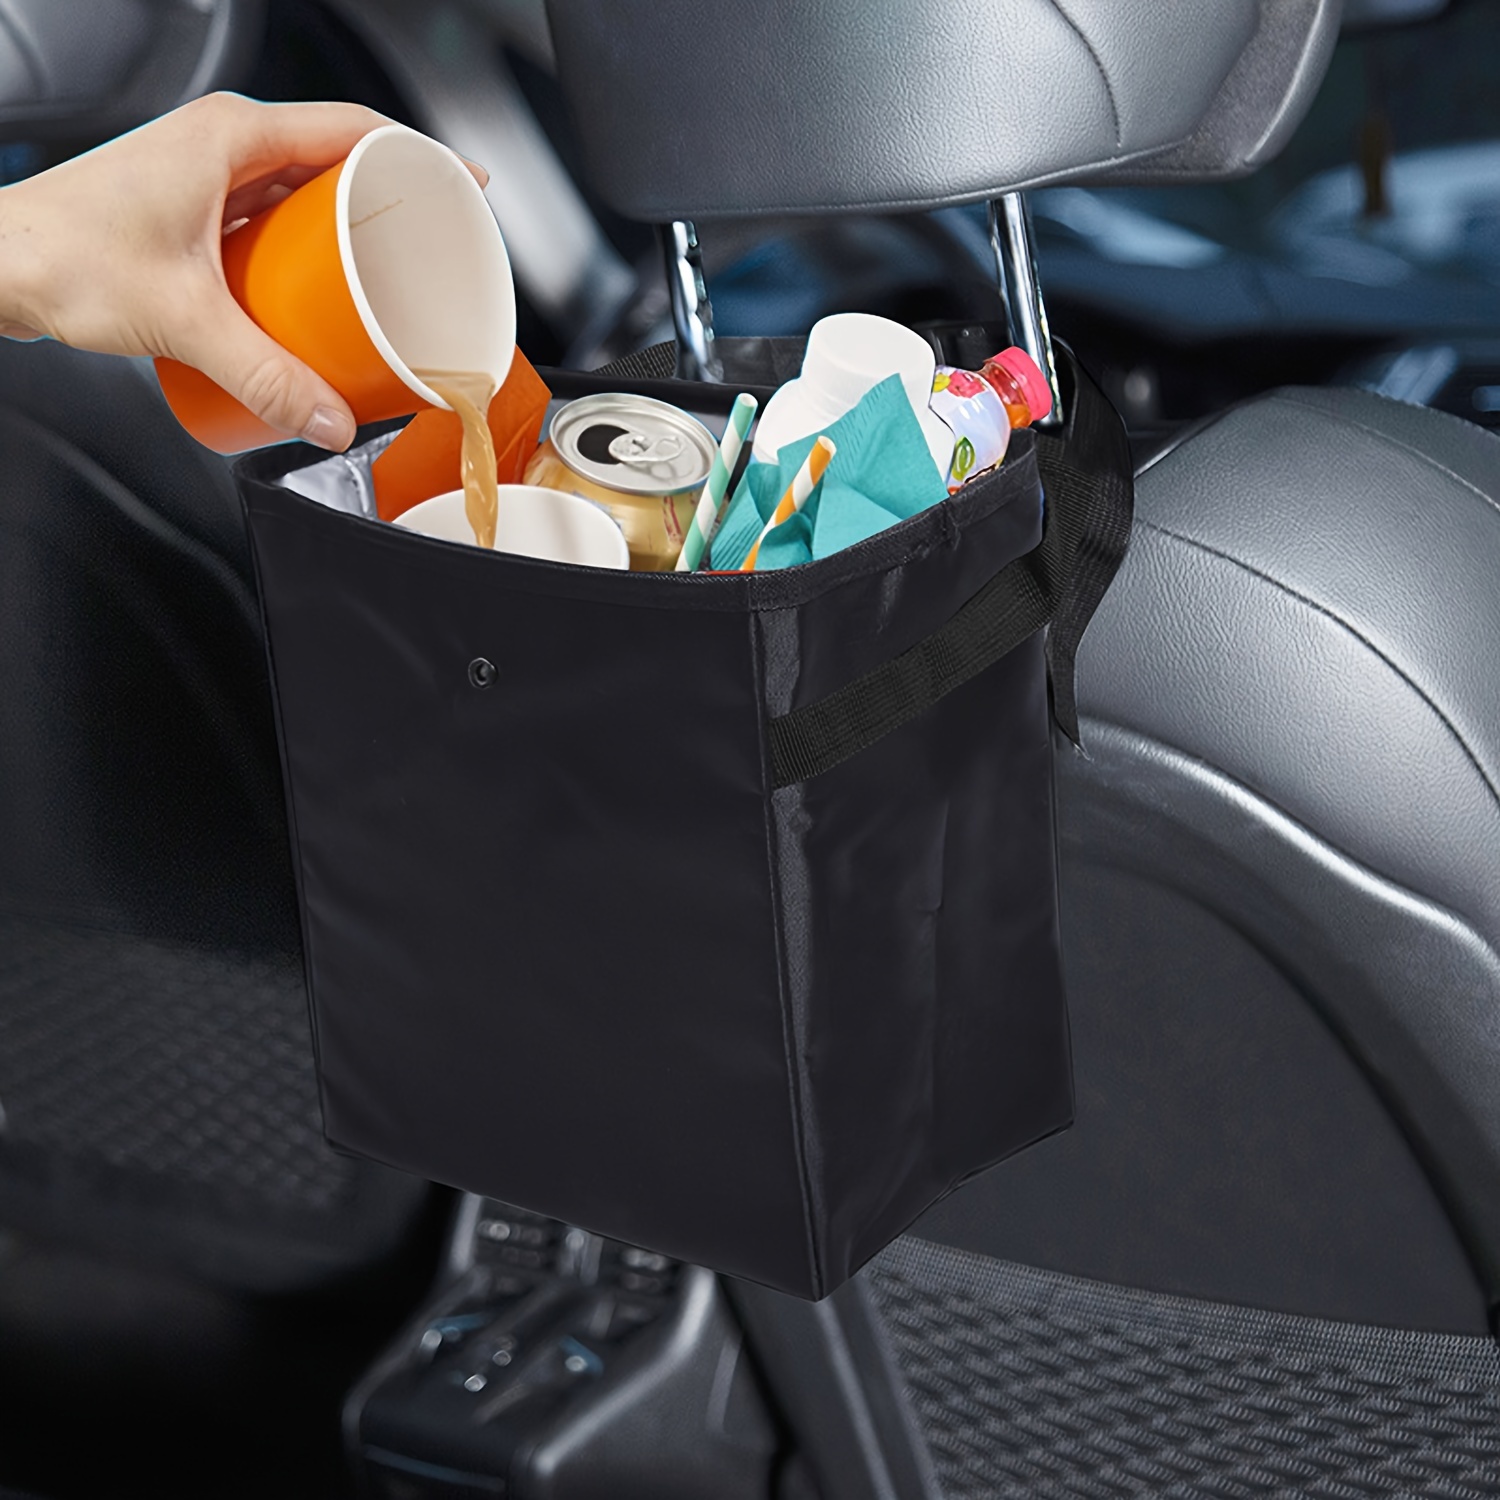 

Waterproof Leak-proof Car Trash Can With Lid, Collapsible Auto Garbage Bag, Large Capacity Polyester Car Bin, Portable Waste Container, Vehicle Storage Organizer Accessory